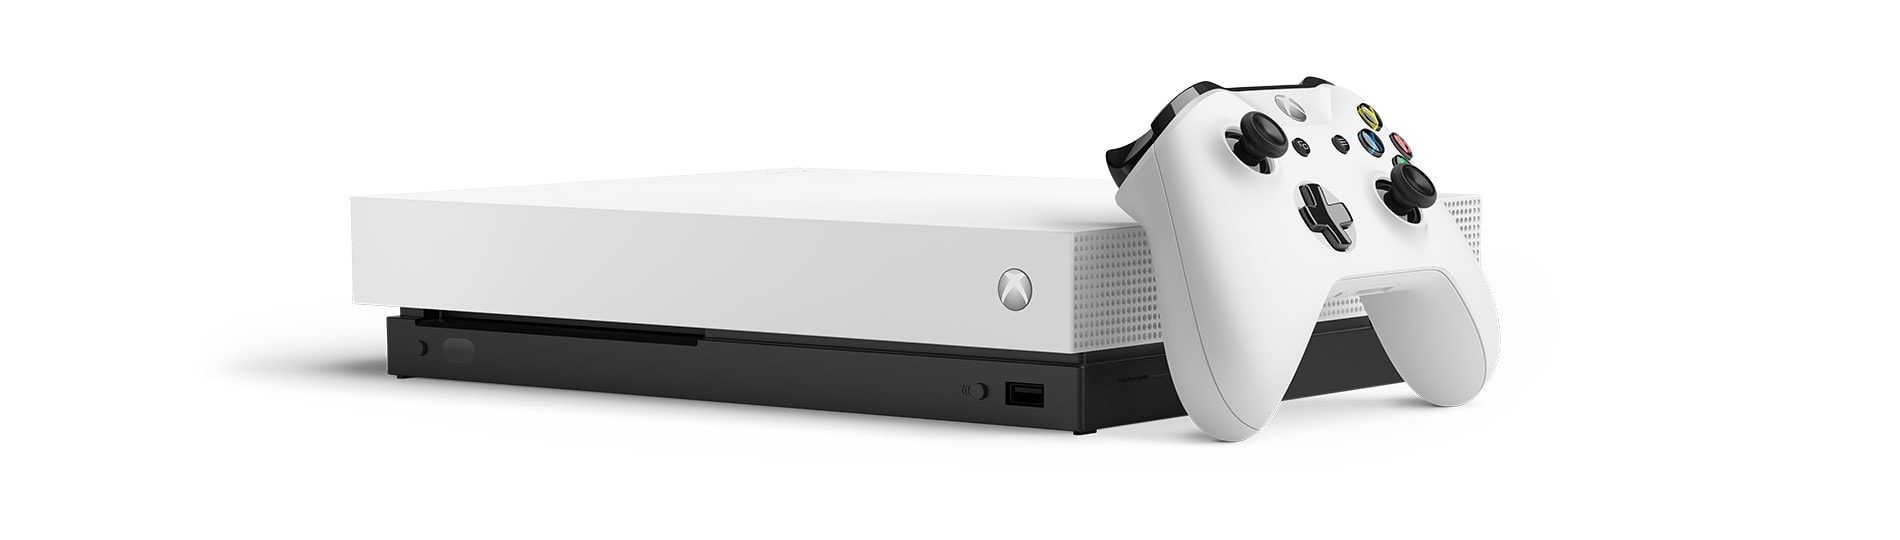 The Xbox One X is white